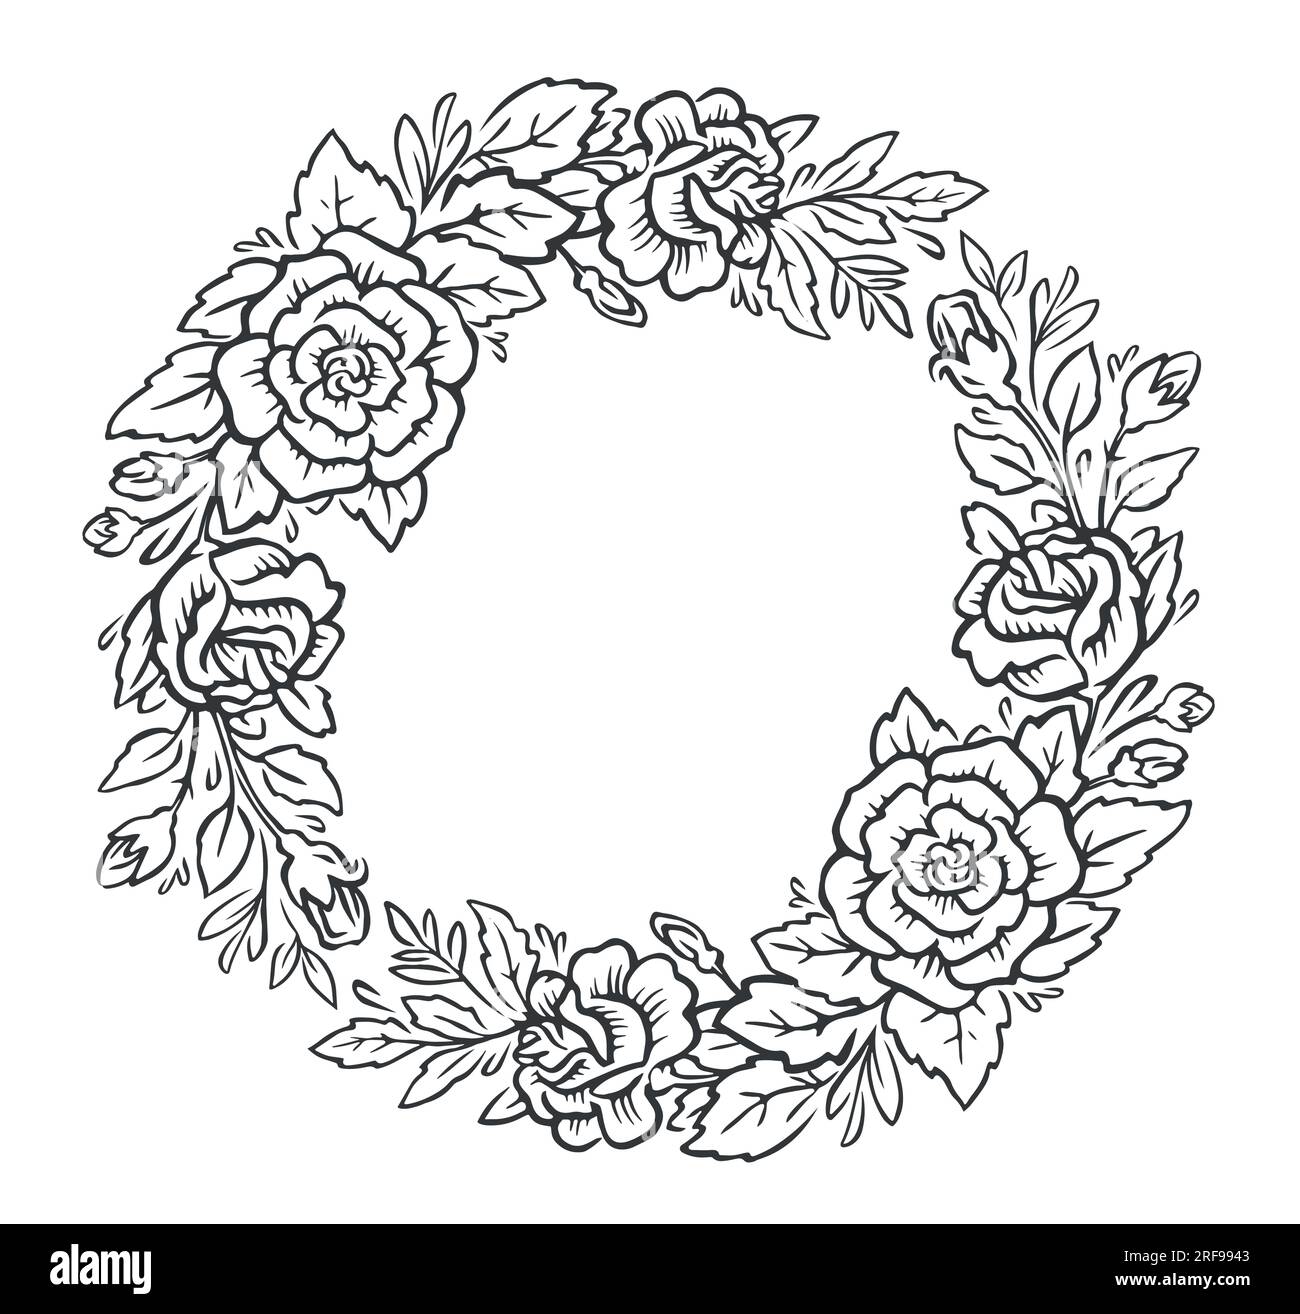 Round frame with decorative flowers with leaves. Hand drawn floral wreath. Roses pattern vintage vector illustration Stock Vector